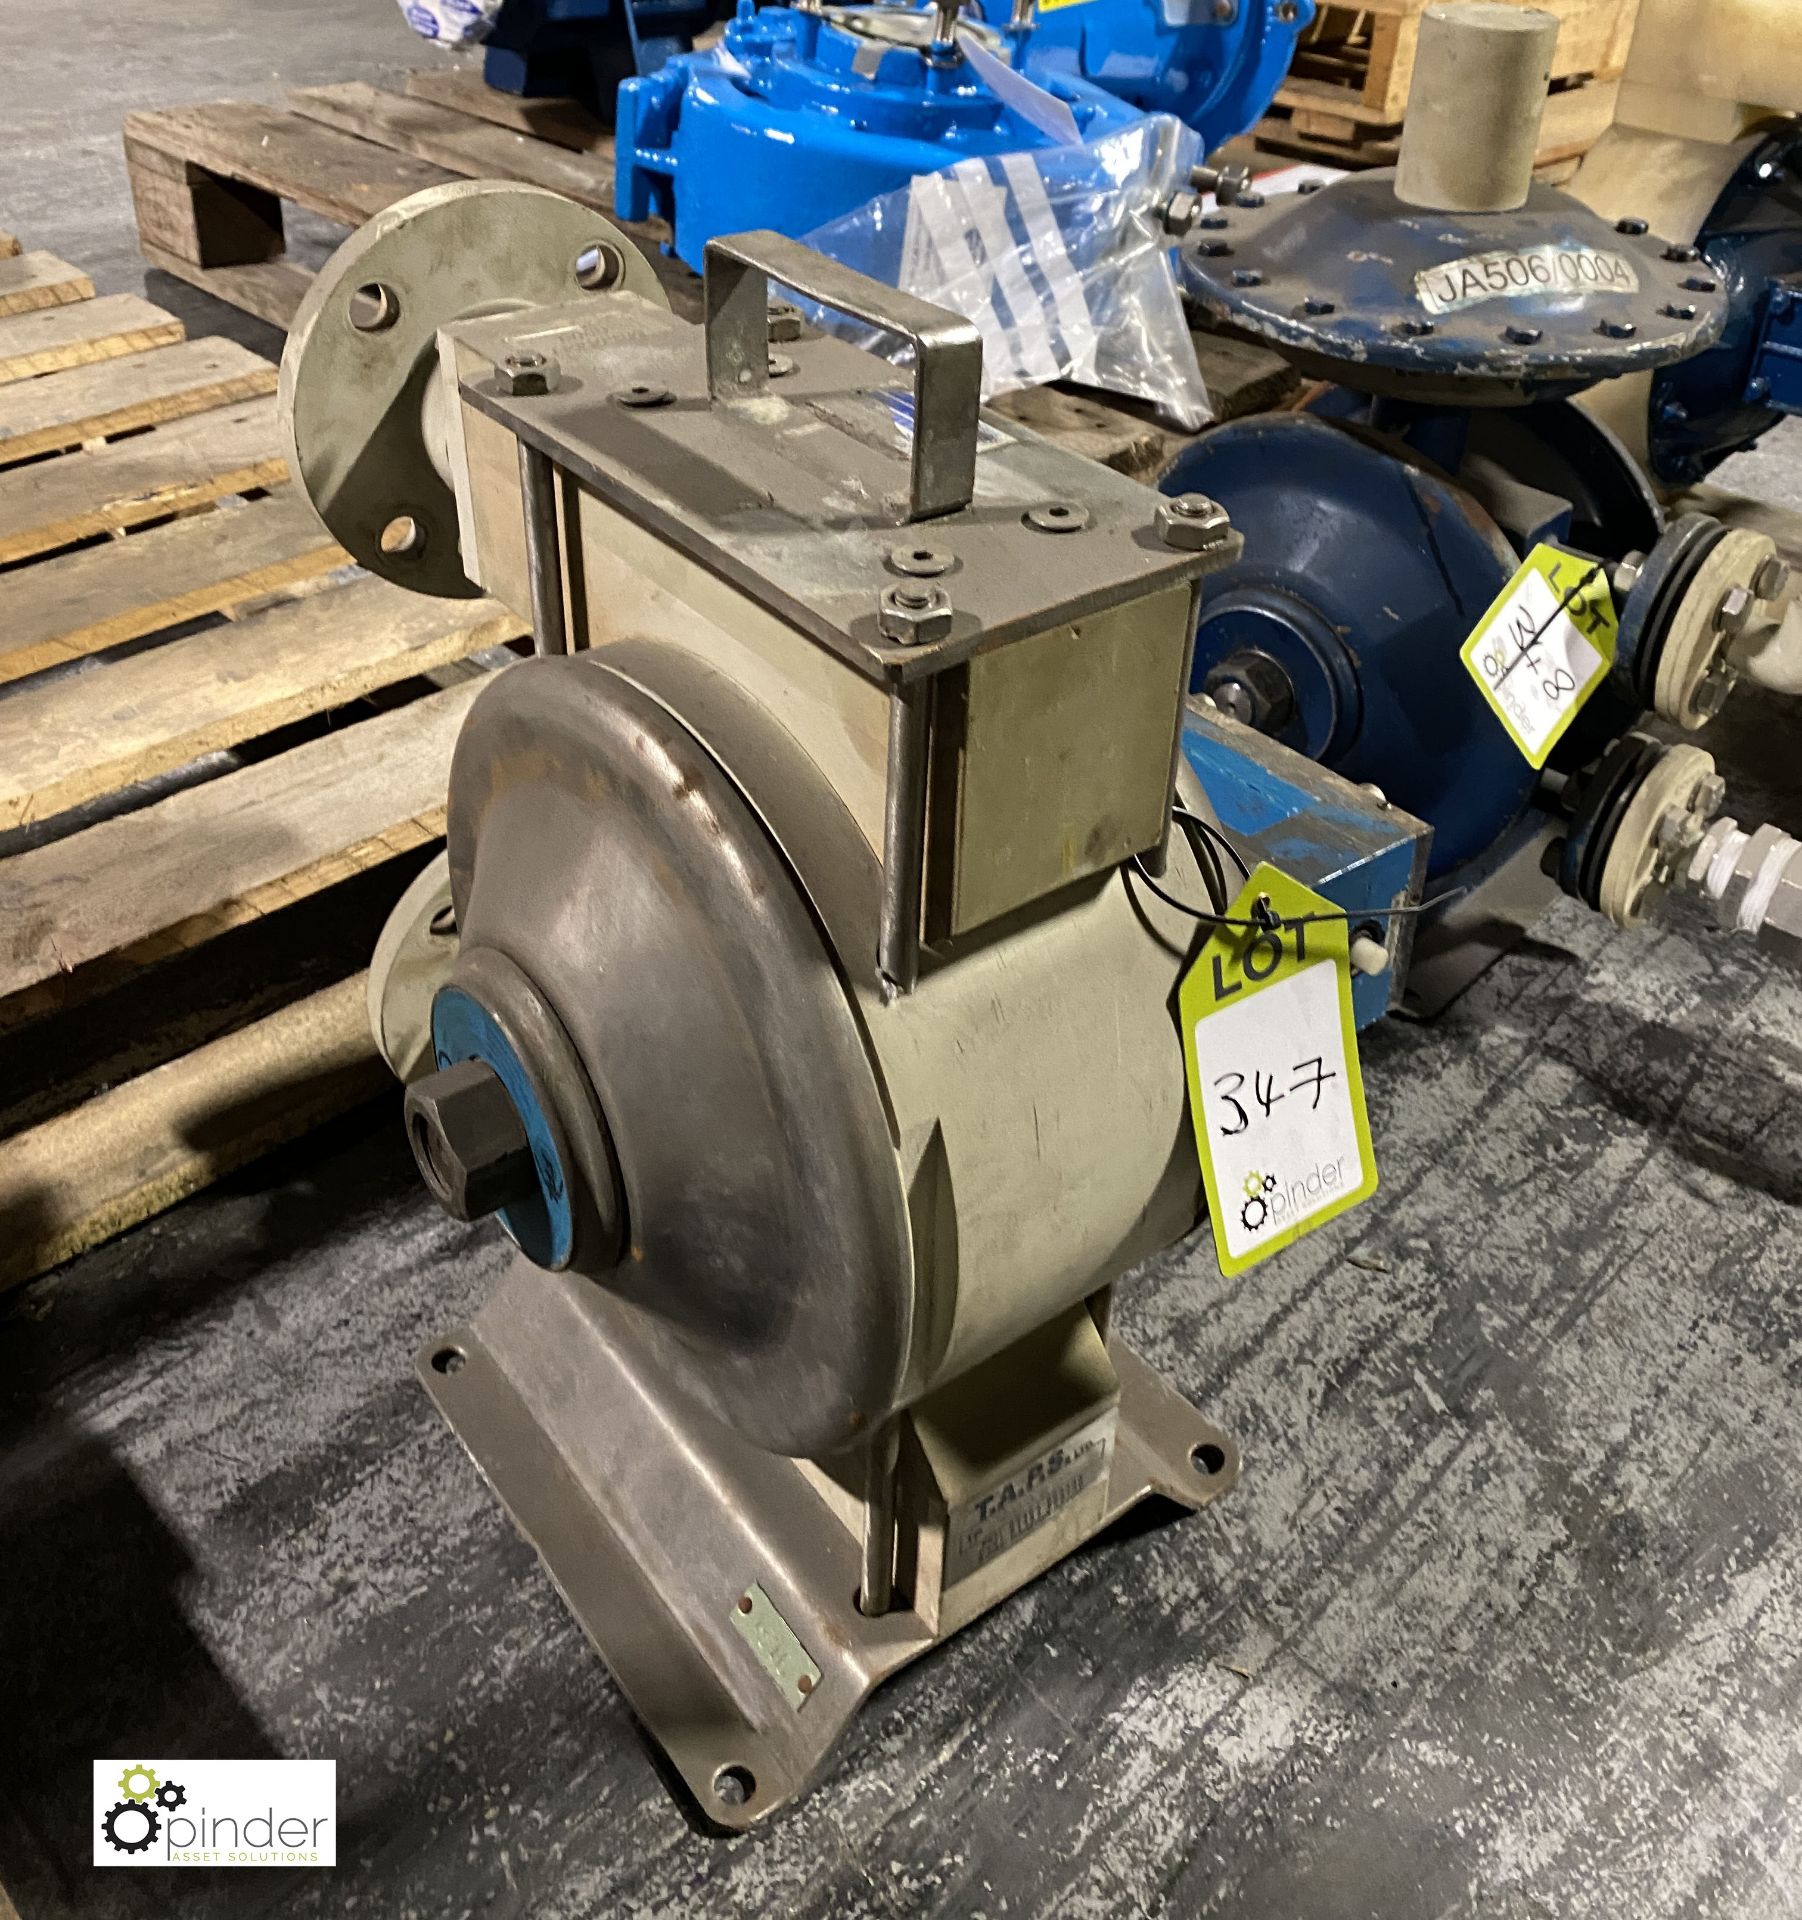 Flowtronic LO Flo Air Diaphragm Pump, Model 517PPTTPS150 (please note there is a lift out fee of £